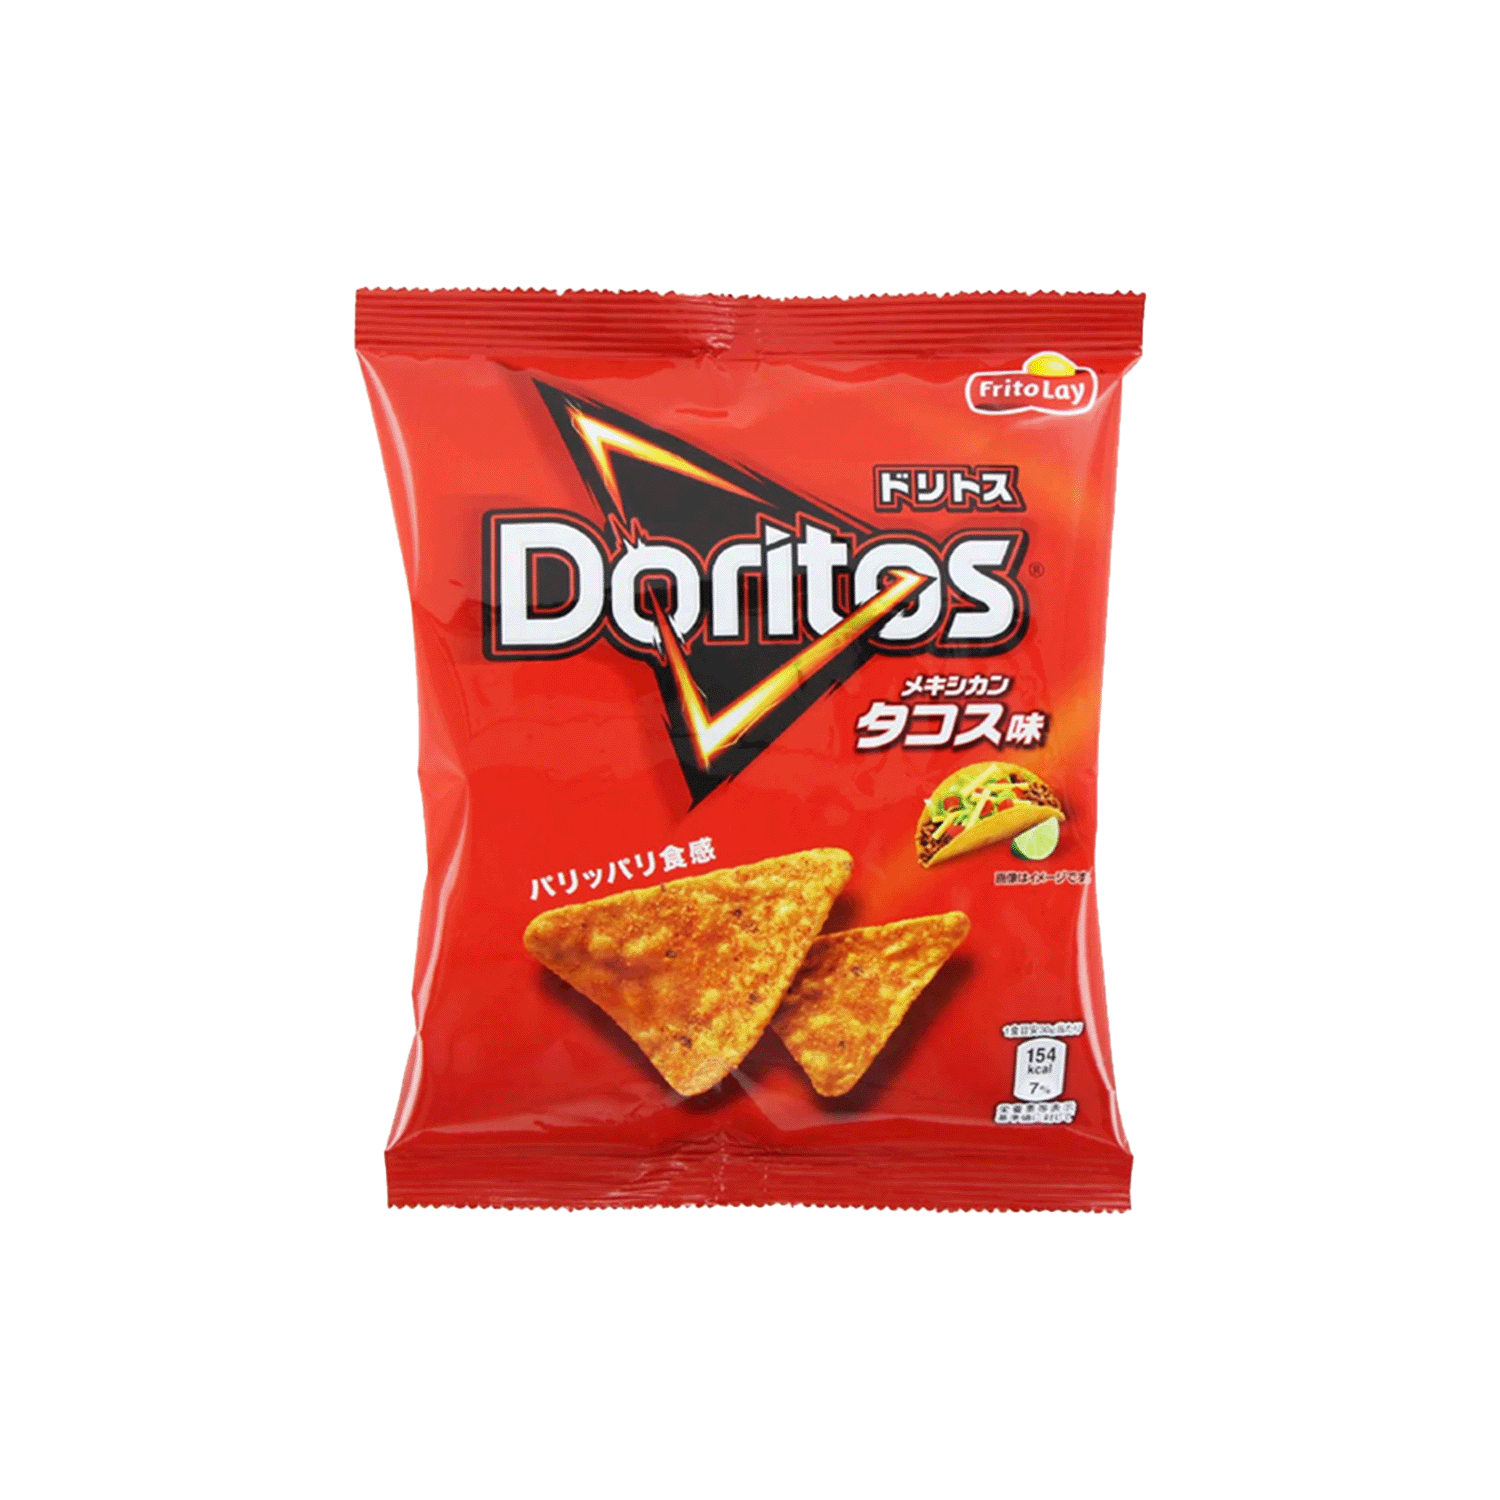 Exotic Doritos Cup Style Grilled Tacos, 30g